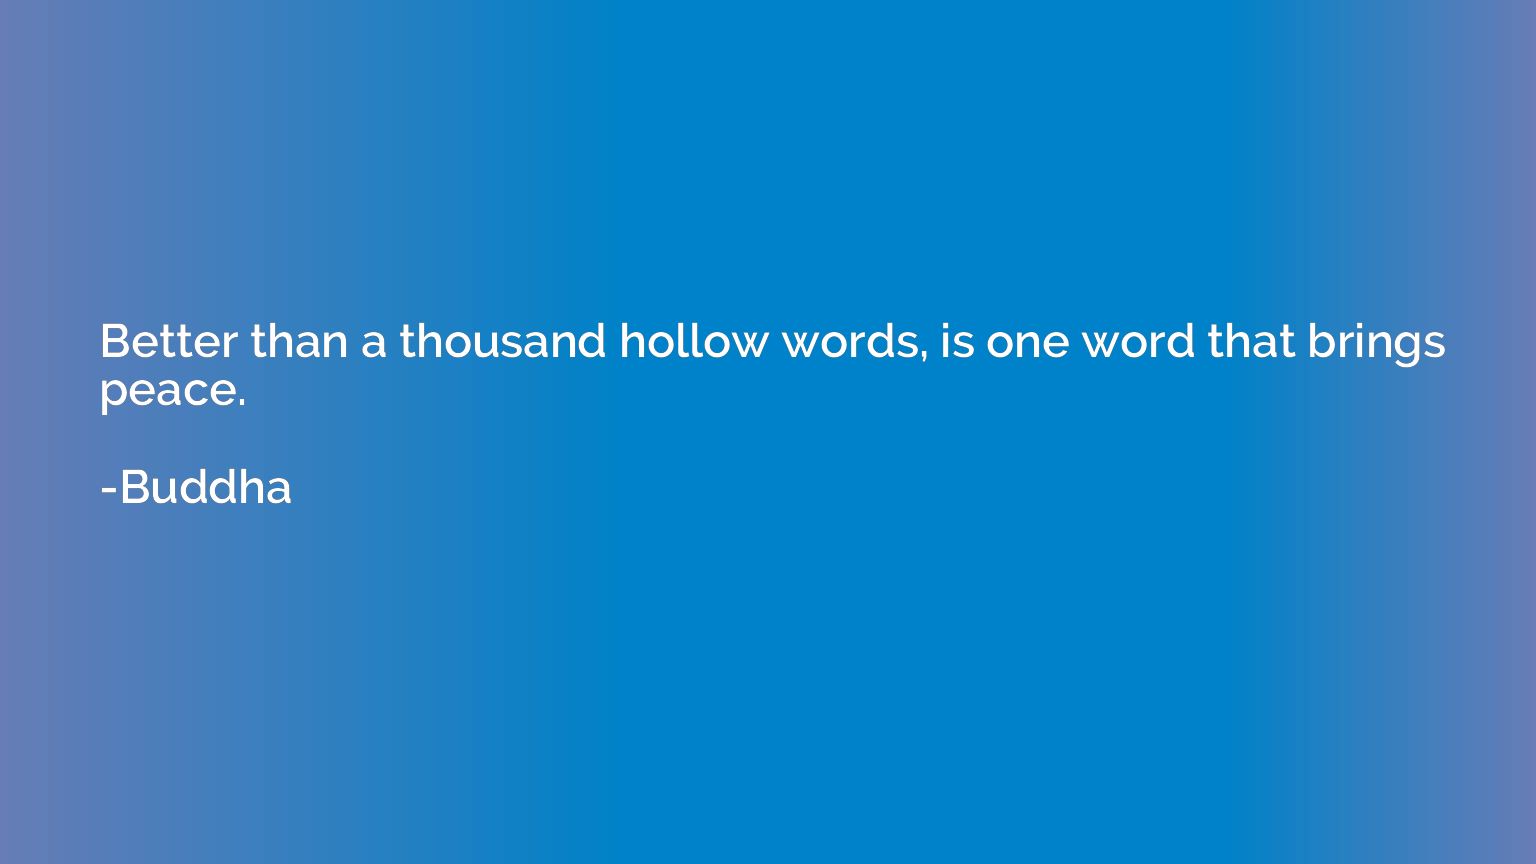 Better than a thousand hollow words, is one word that brings